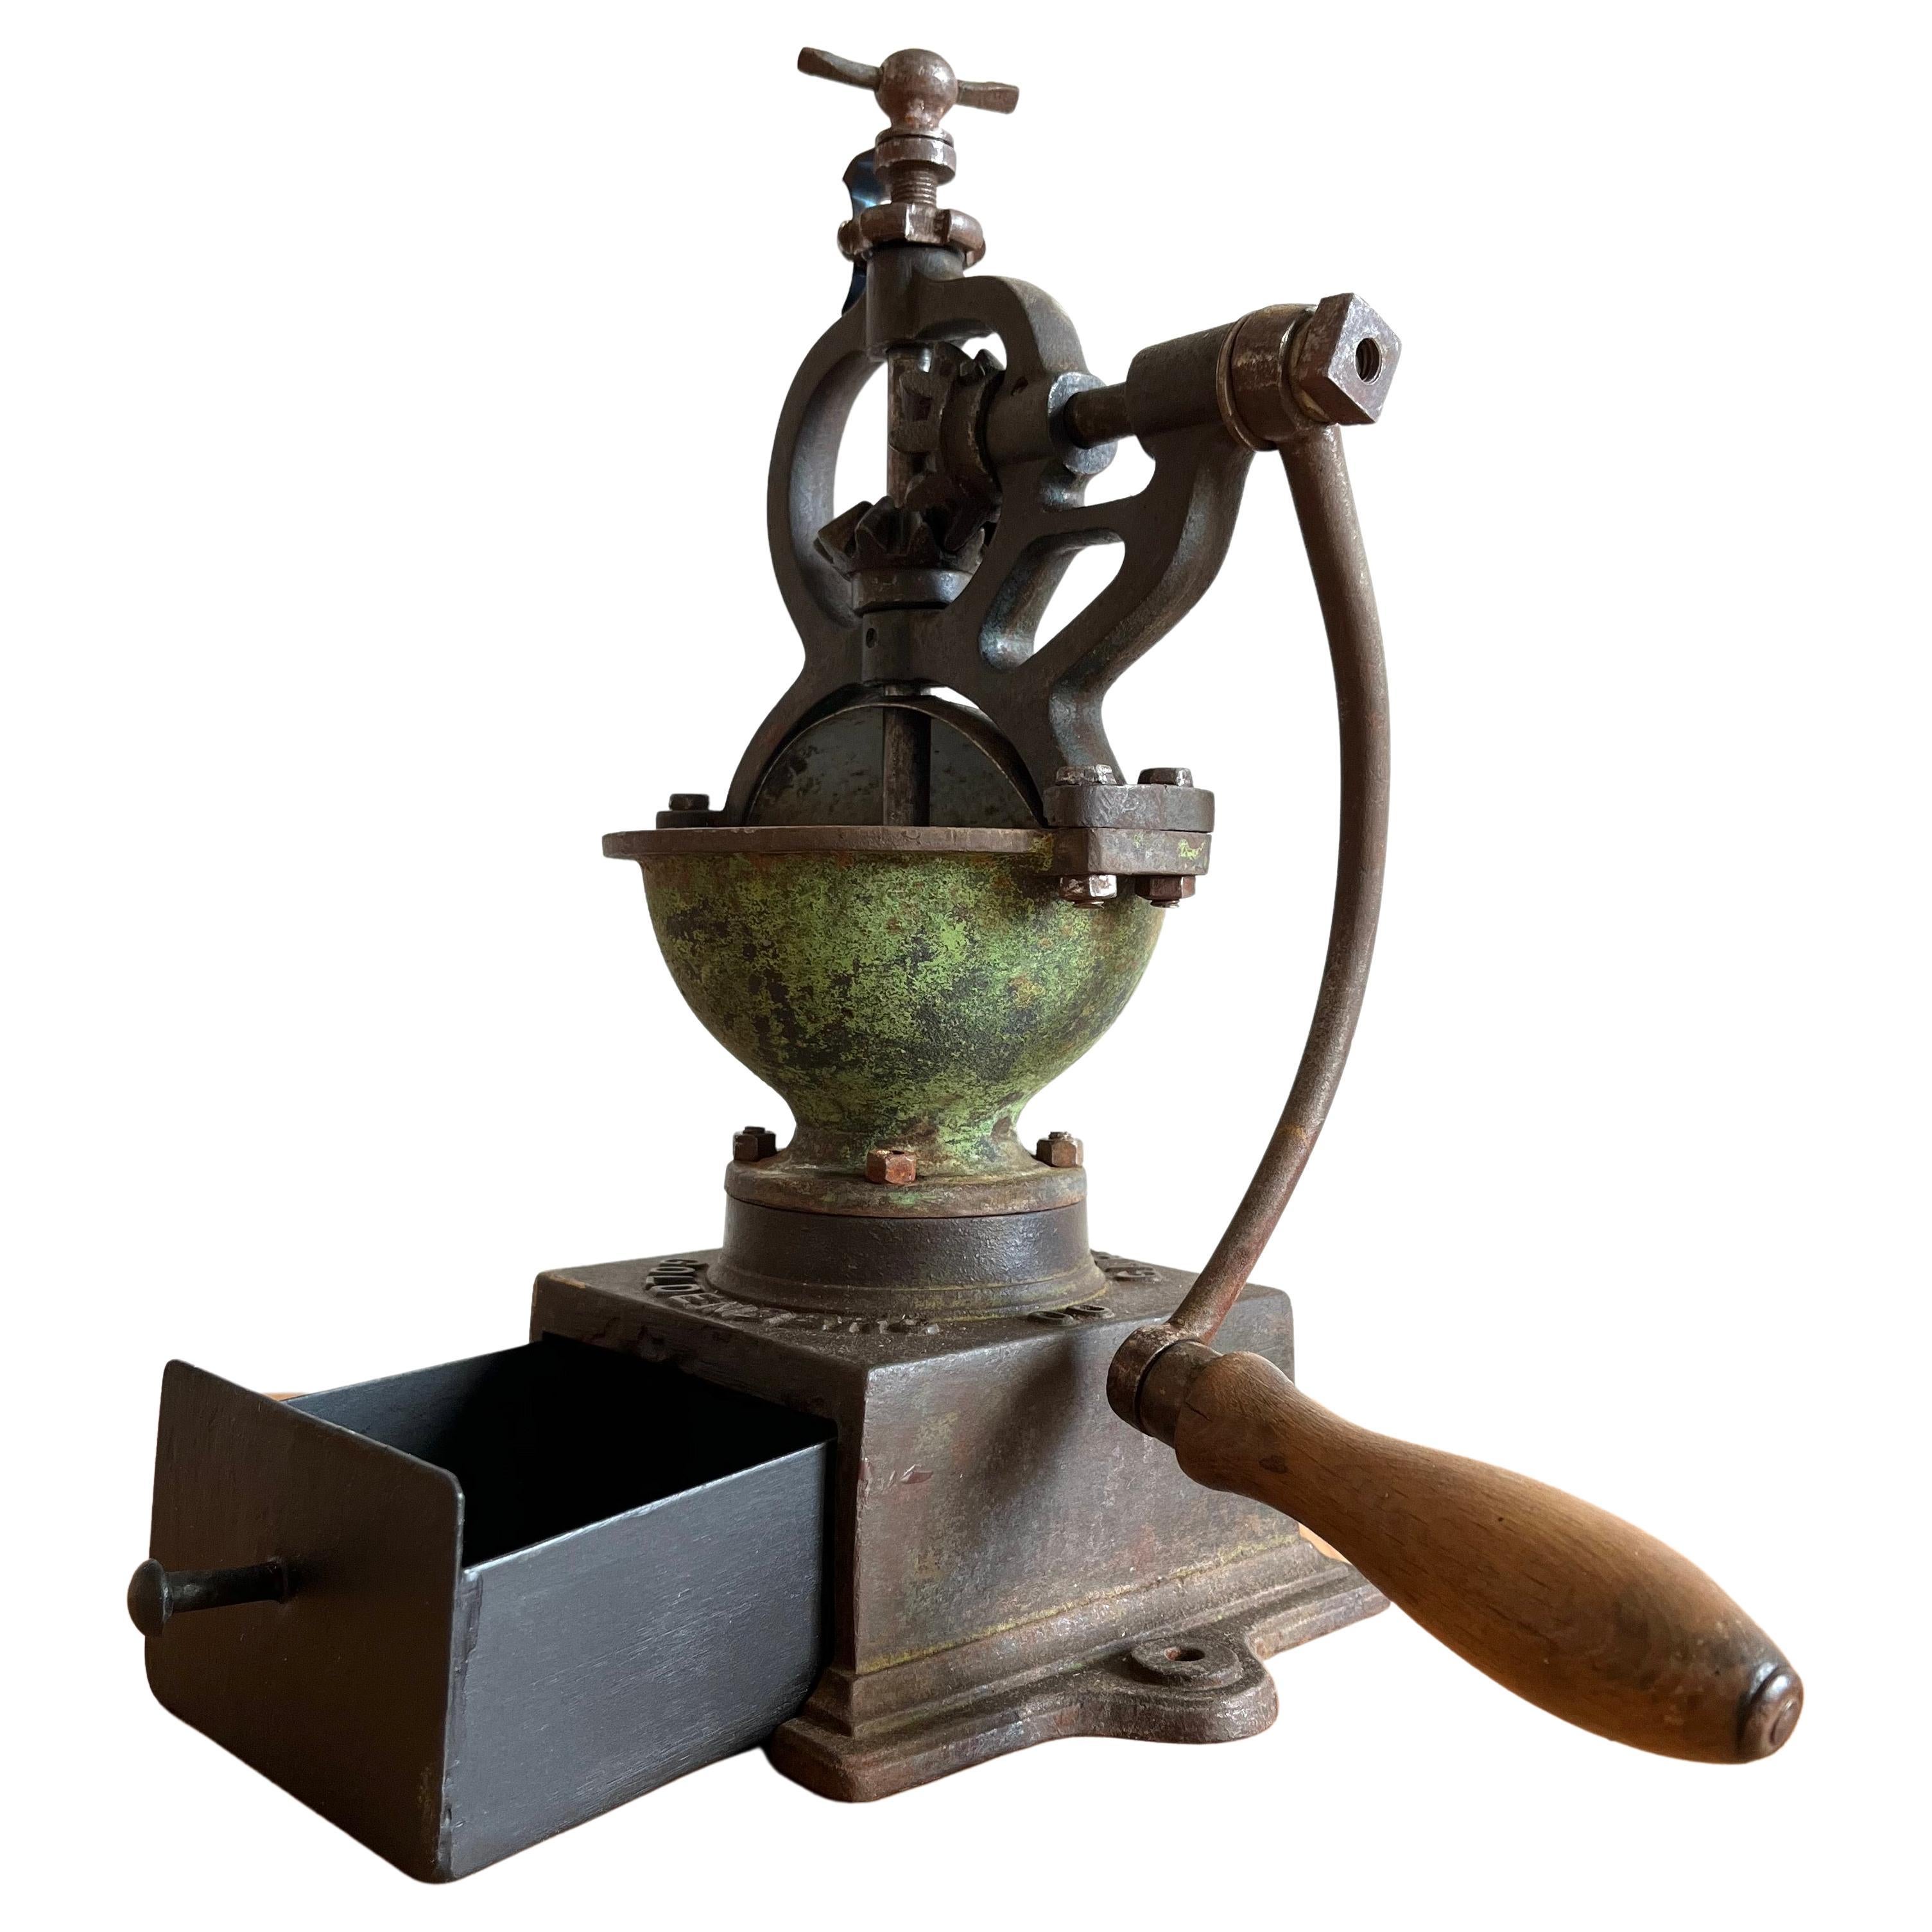 Coffee Grinder from Goldemberg